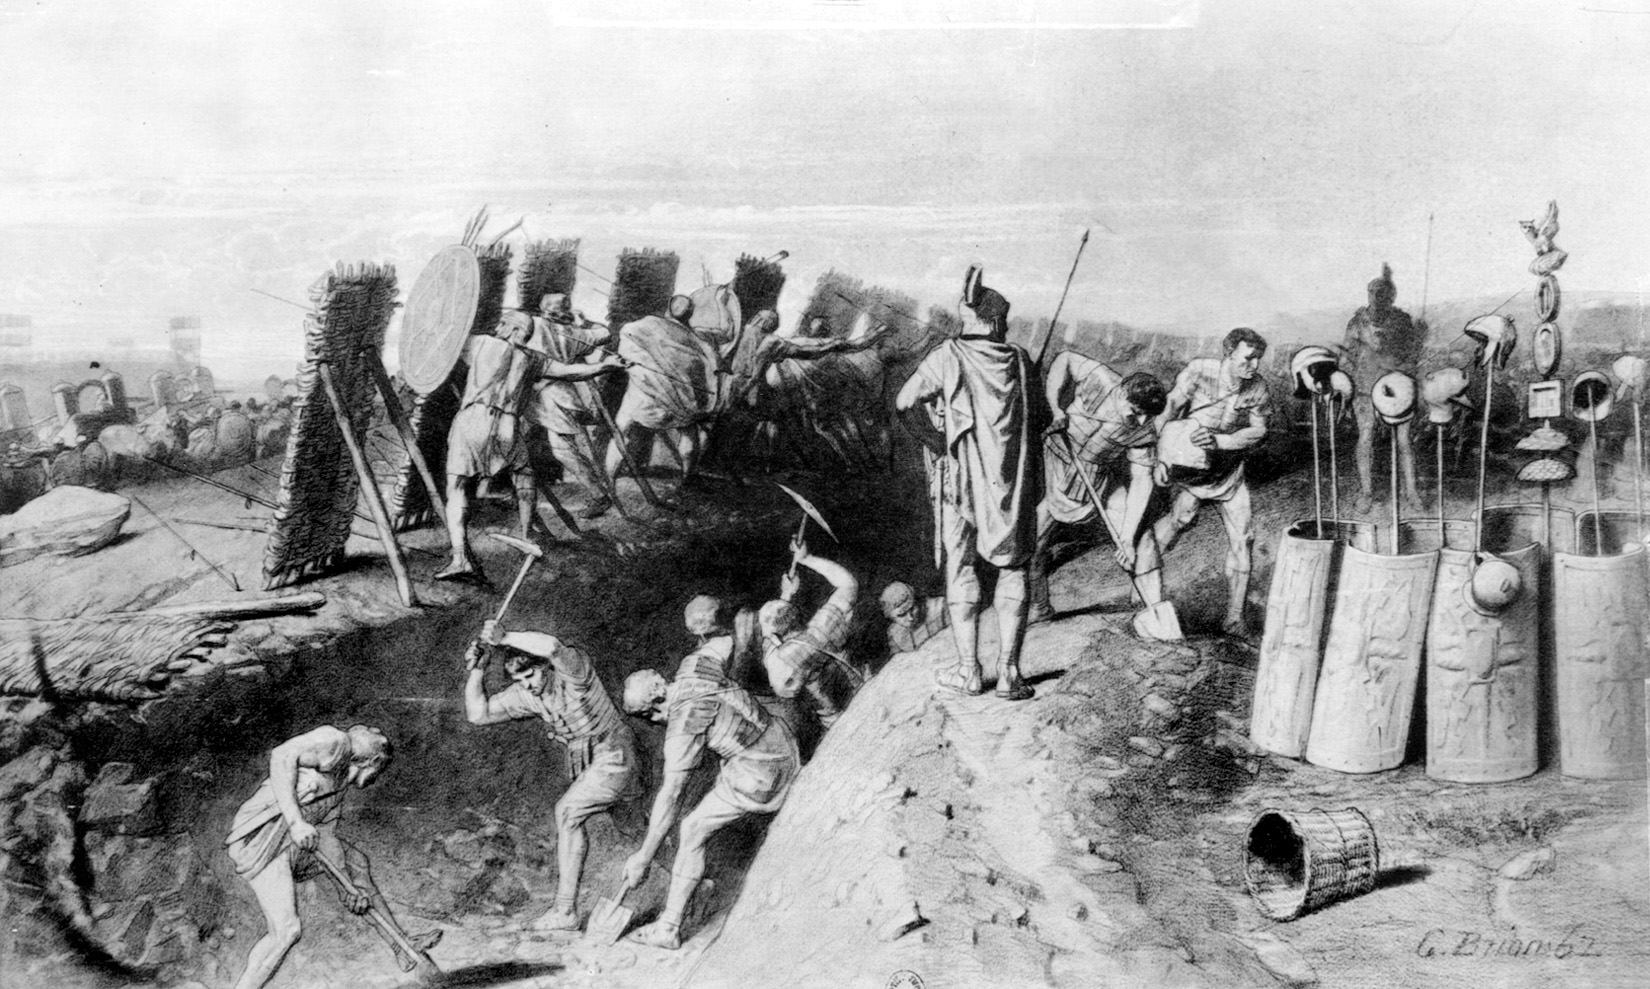 A group of Romans dig a defensive trench while their compatriots fend off attackers.